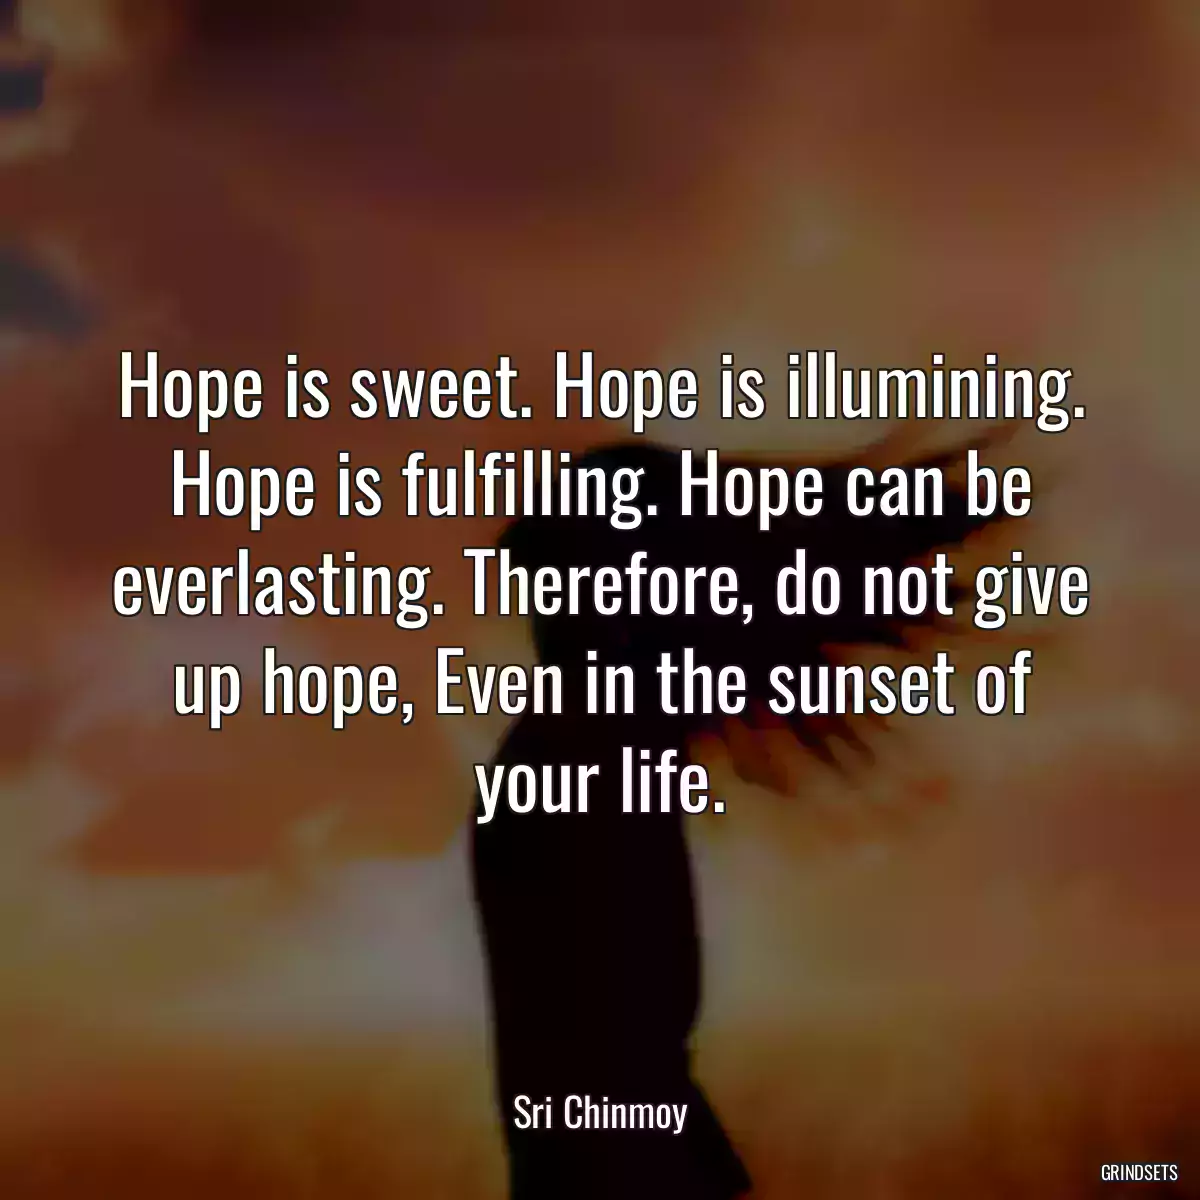 Hope is sweet. Hope is illumining. Hope is fulfilling. Hope can be everlasting. Therefore, do not give up hope, Even in the sunset of your life.